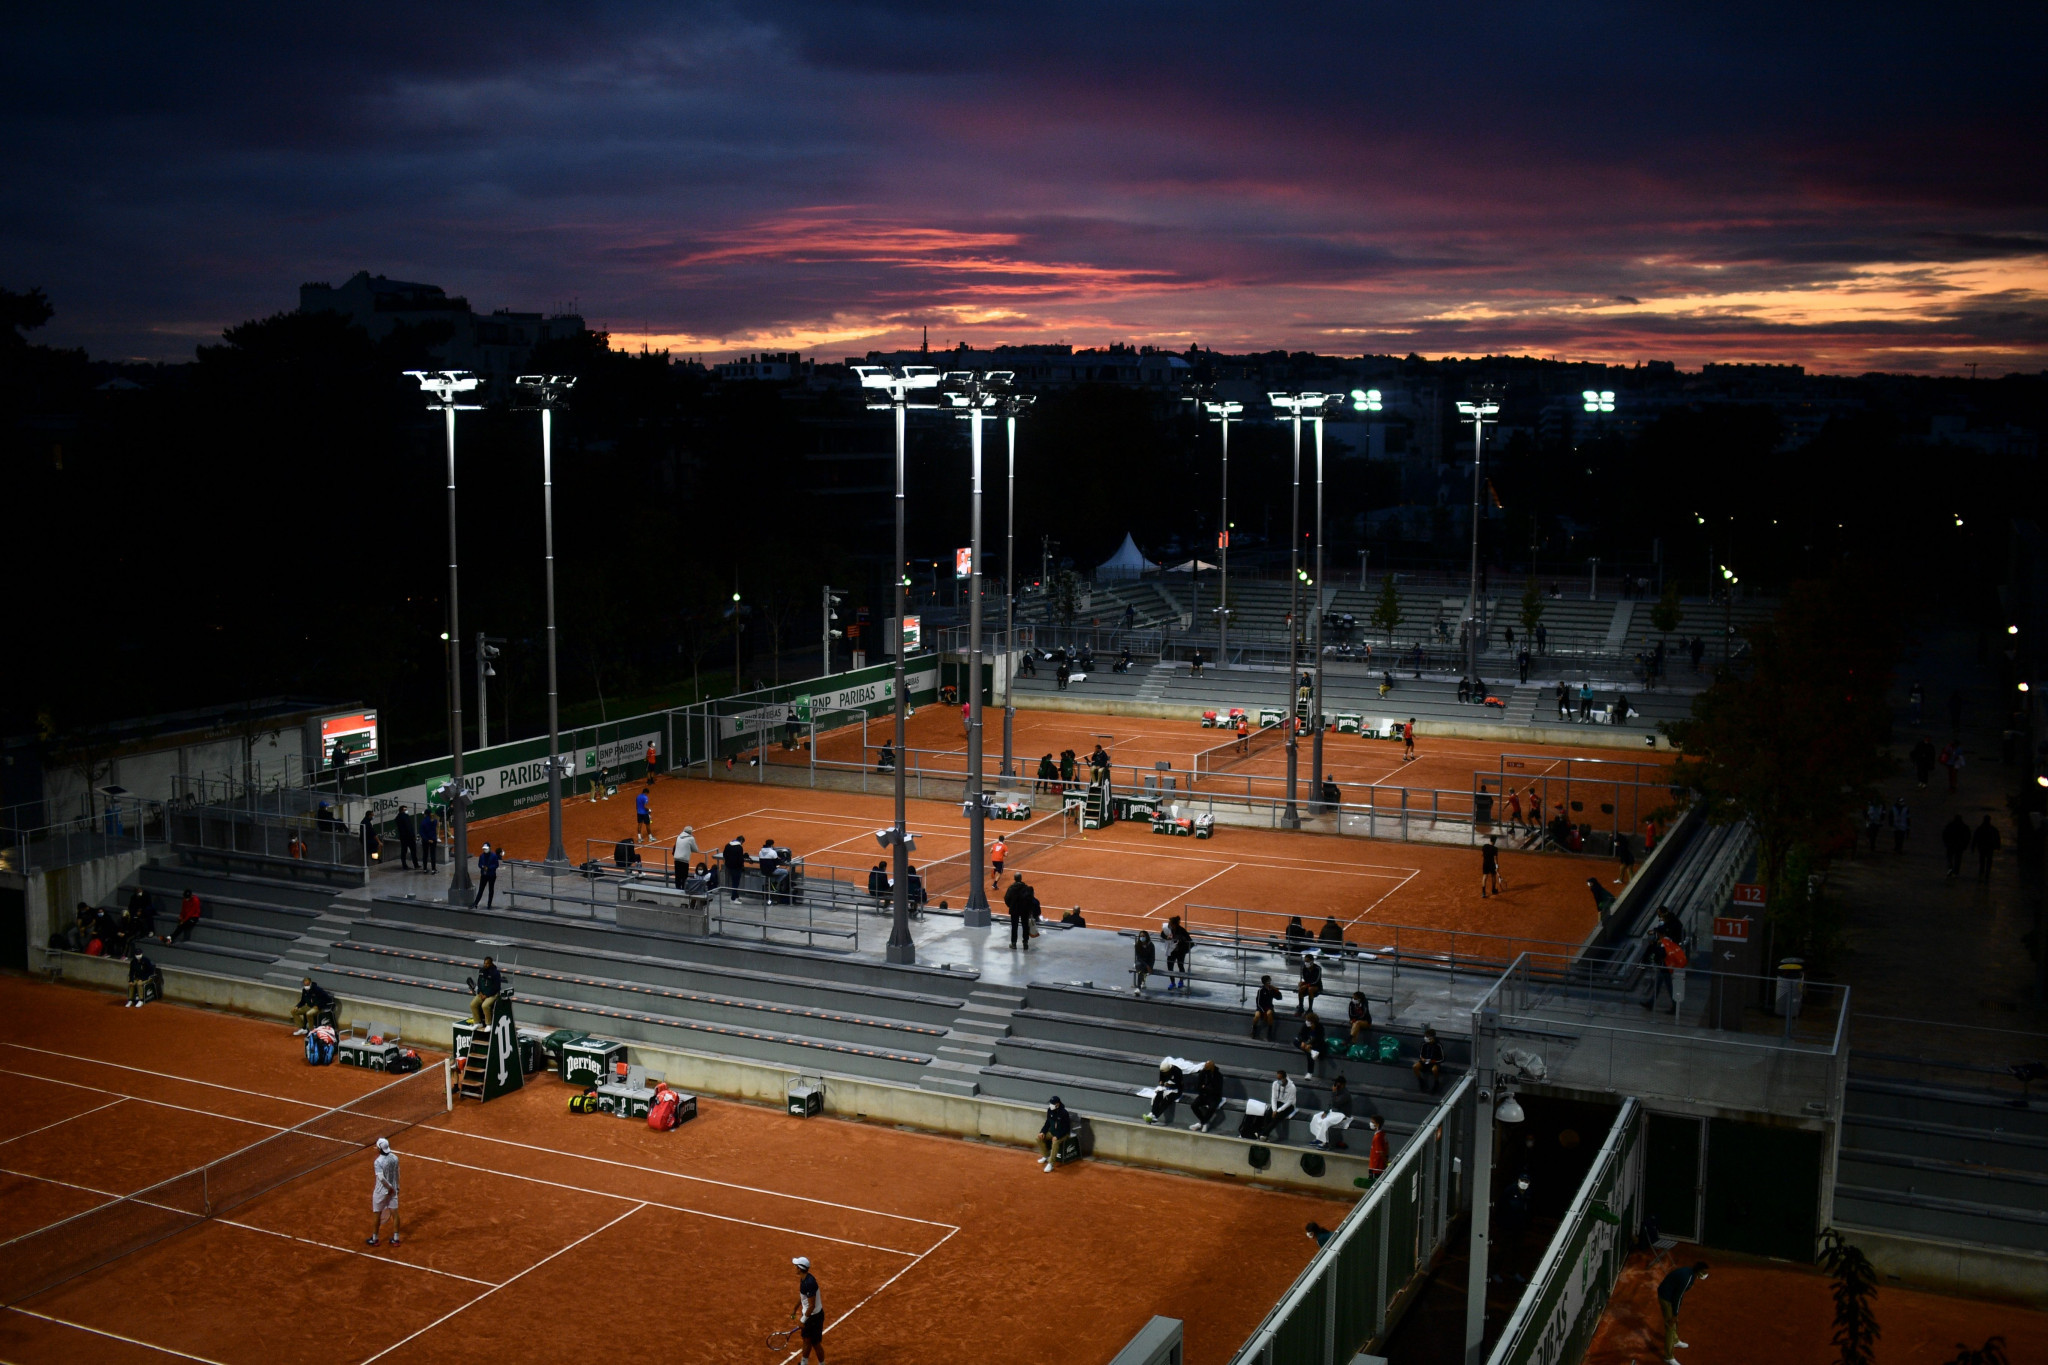 The addition of floodlights to the Roland Garros complex has allowed matches to continue late into the evening ©Getty Images